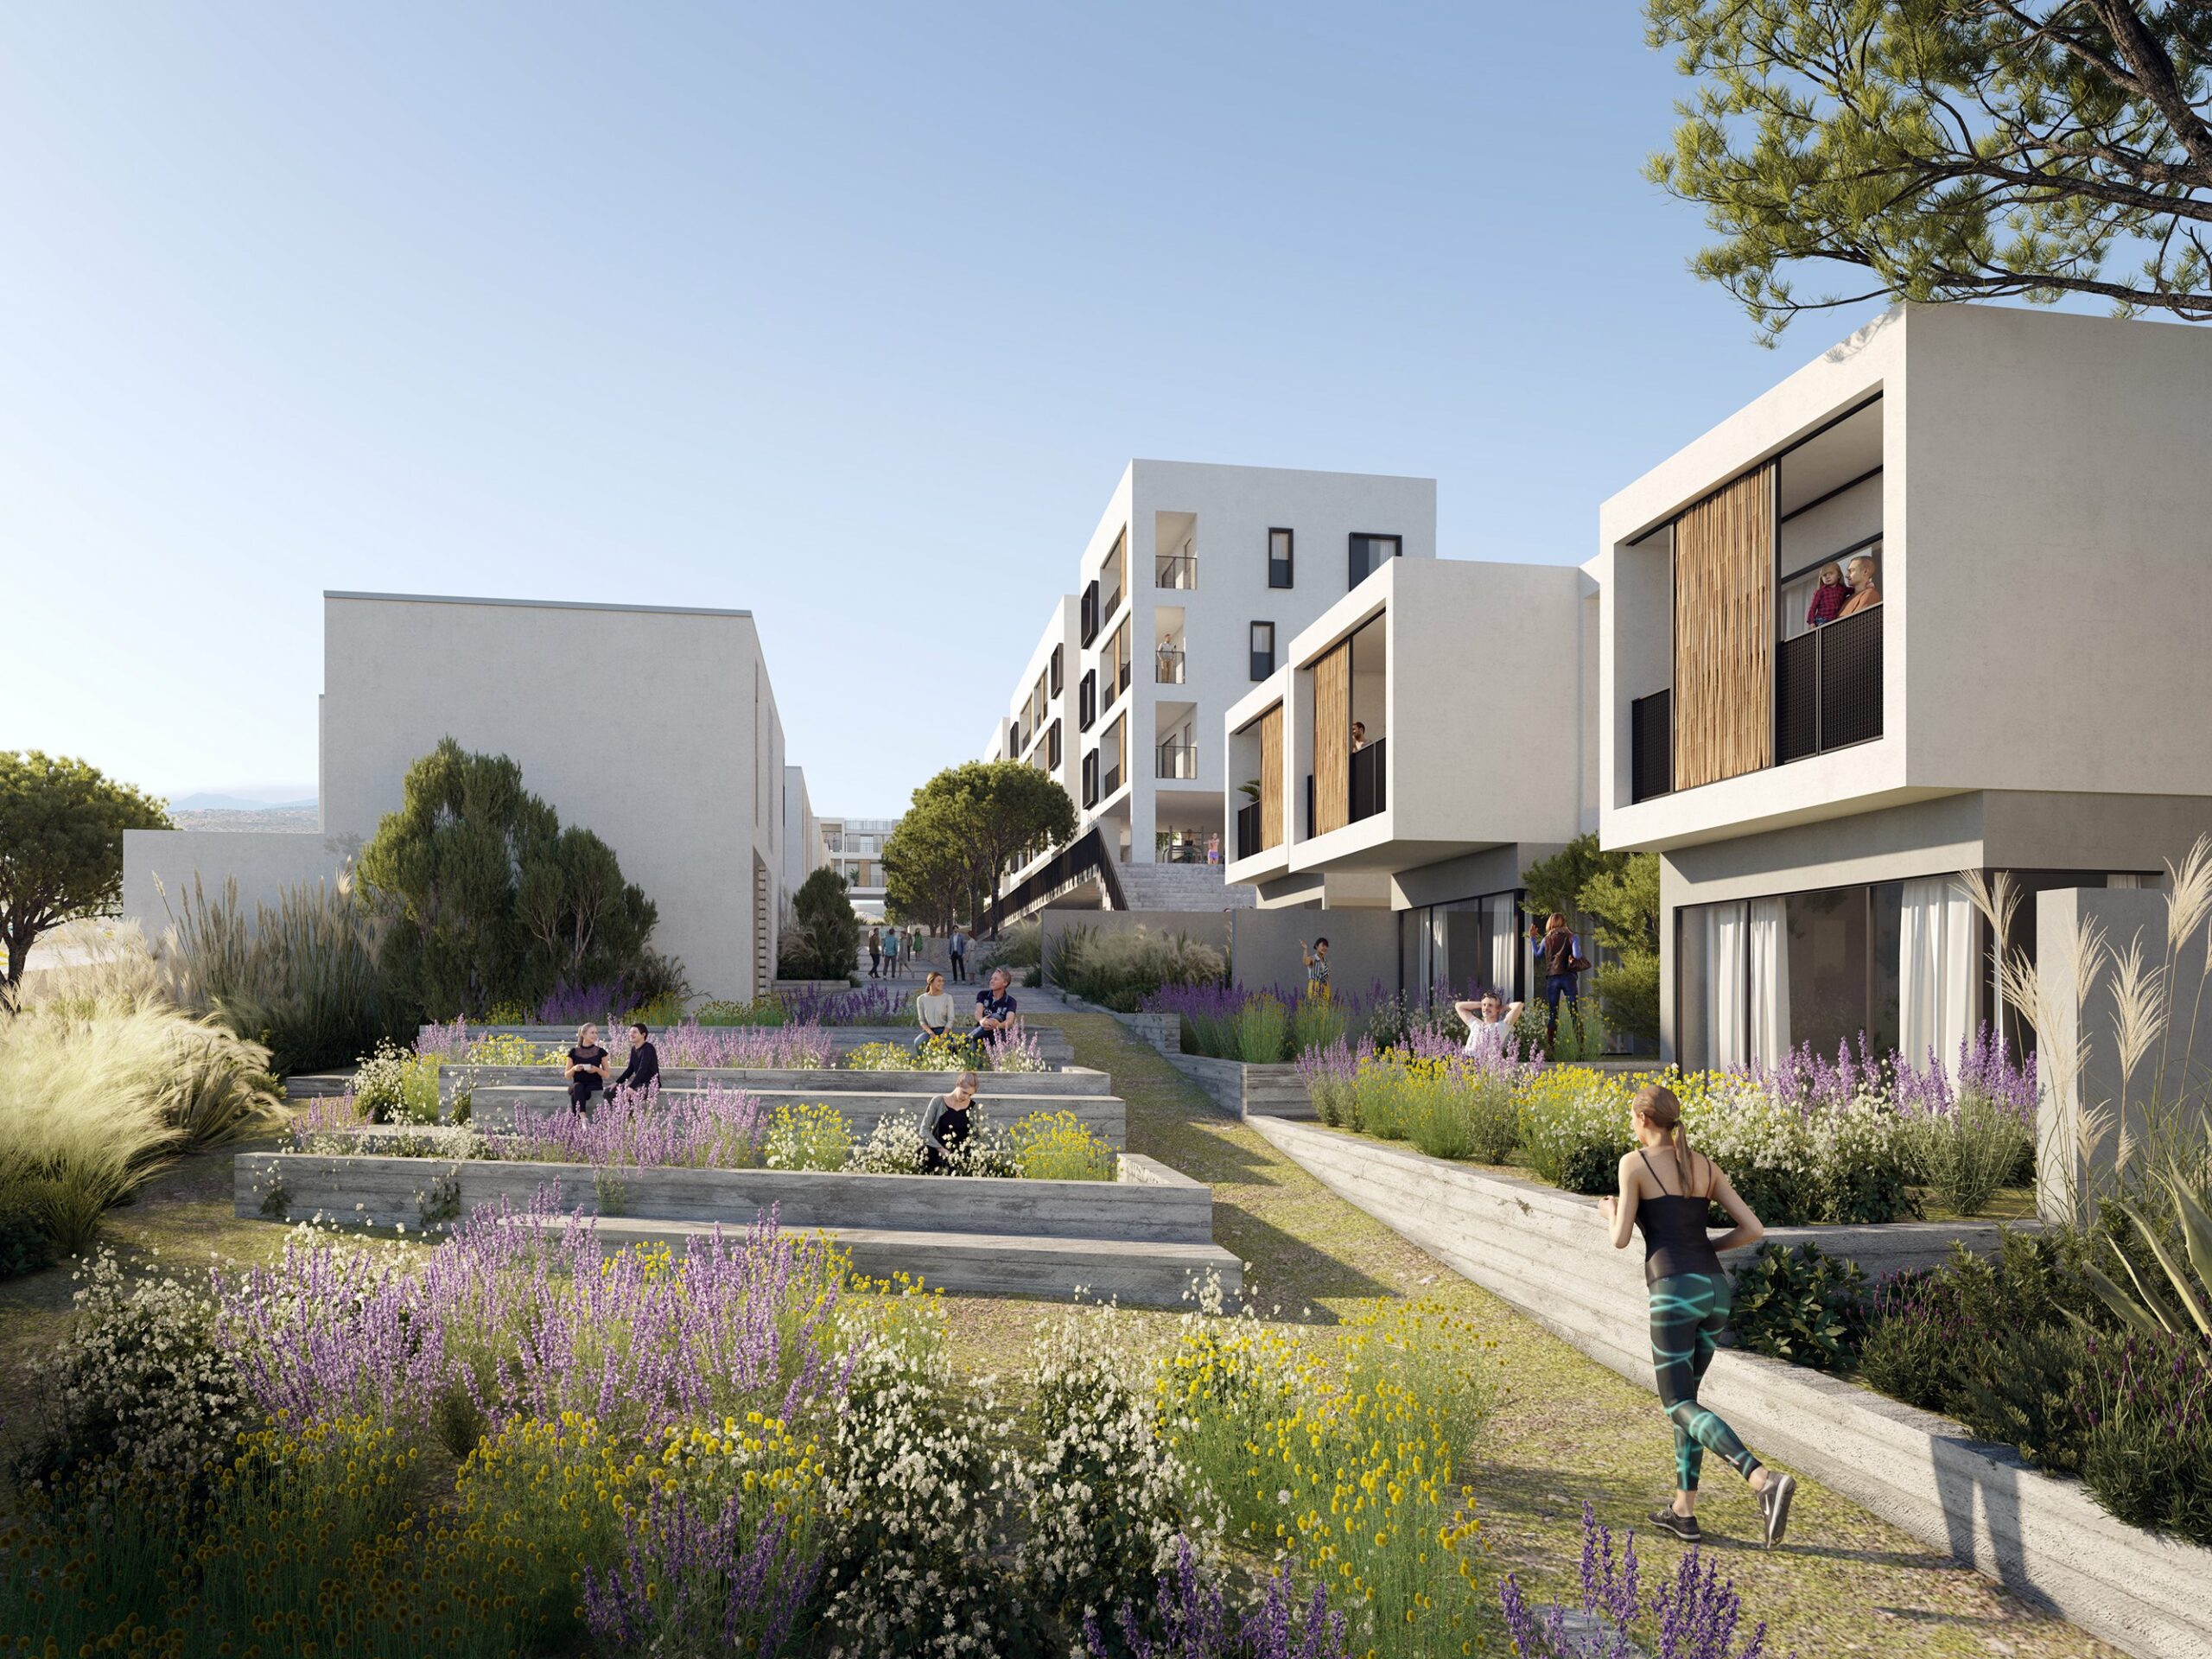 COMPETITION: SOCIAL HOUSING IN PANO POLEMIDIA